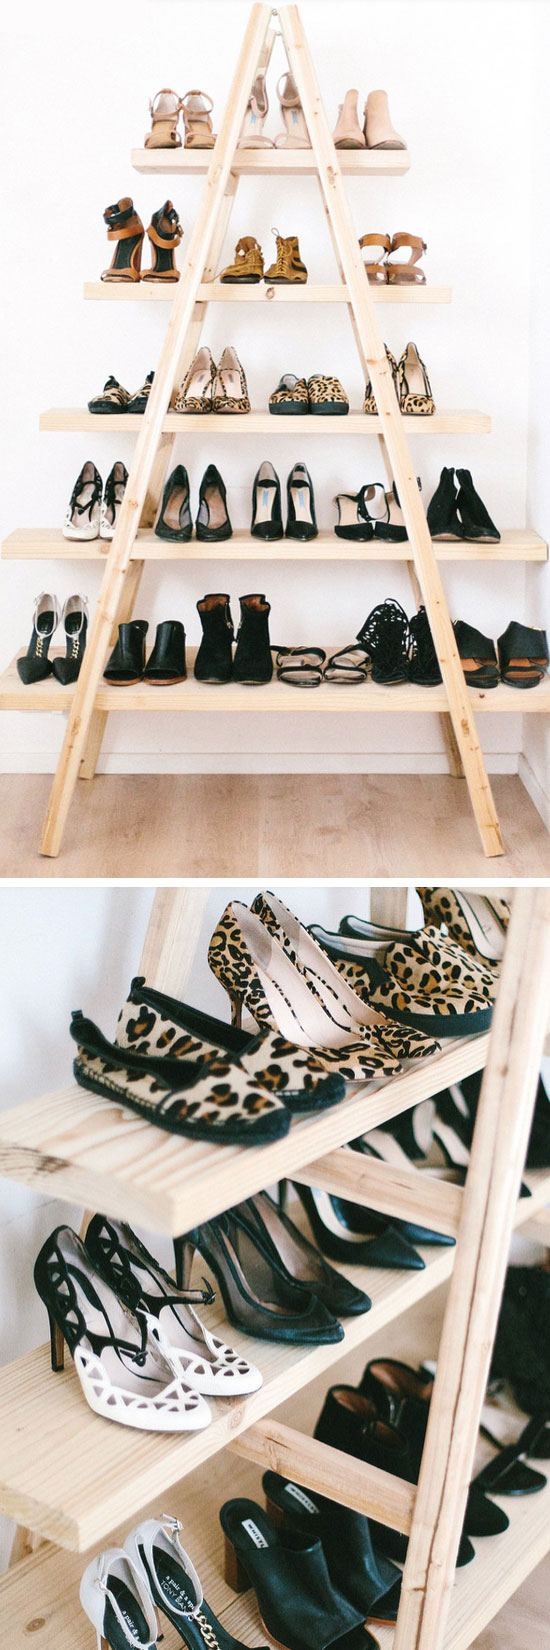 22 Chaos Eliminating Diy Shoe Rack Ideas Flex those talented muscles and get ready to put your hands to work how to make a diy shoe organizer and rack for the closet (via our house now a home). 22 chaos eliminating diy shoe rack ideas